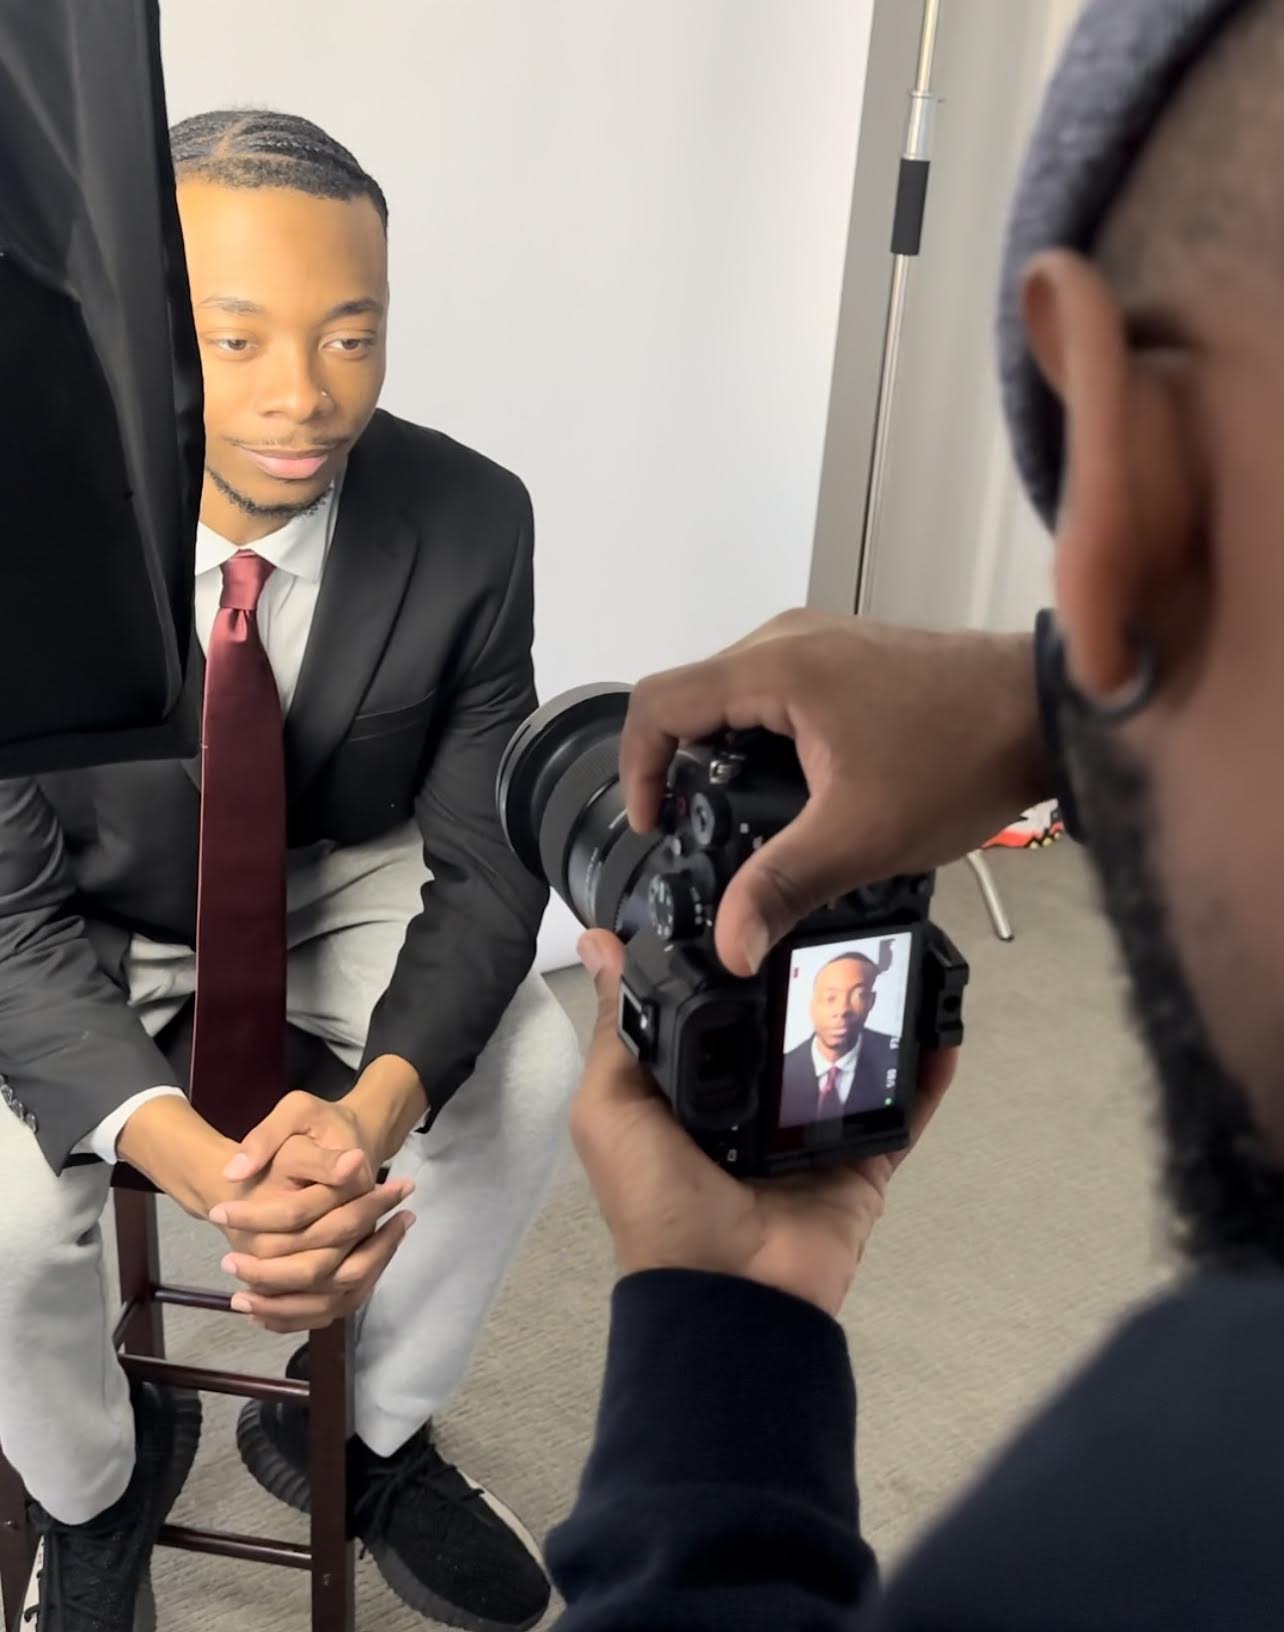 Dwayne Davis wears a red tie and an a dark blazer as he poses for a photoshoot with Jamal Josef.